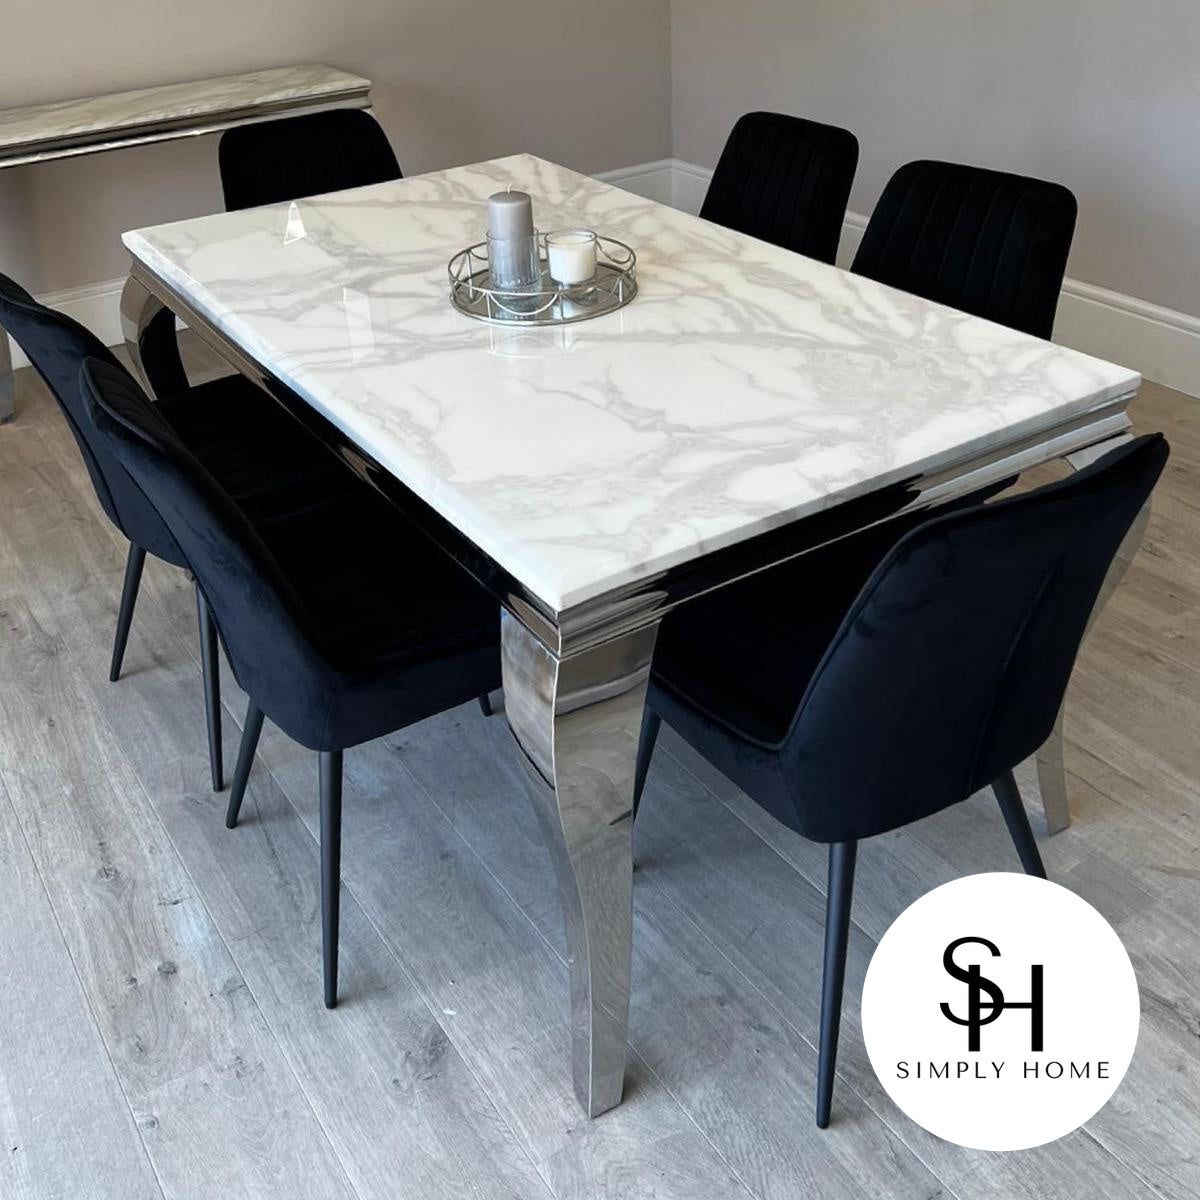 Riviera White Marble Dining Table with Black Luca Chairs